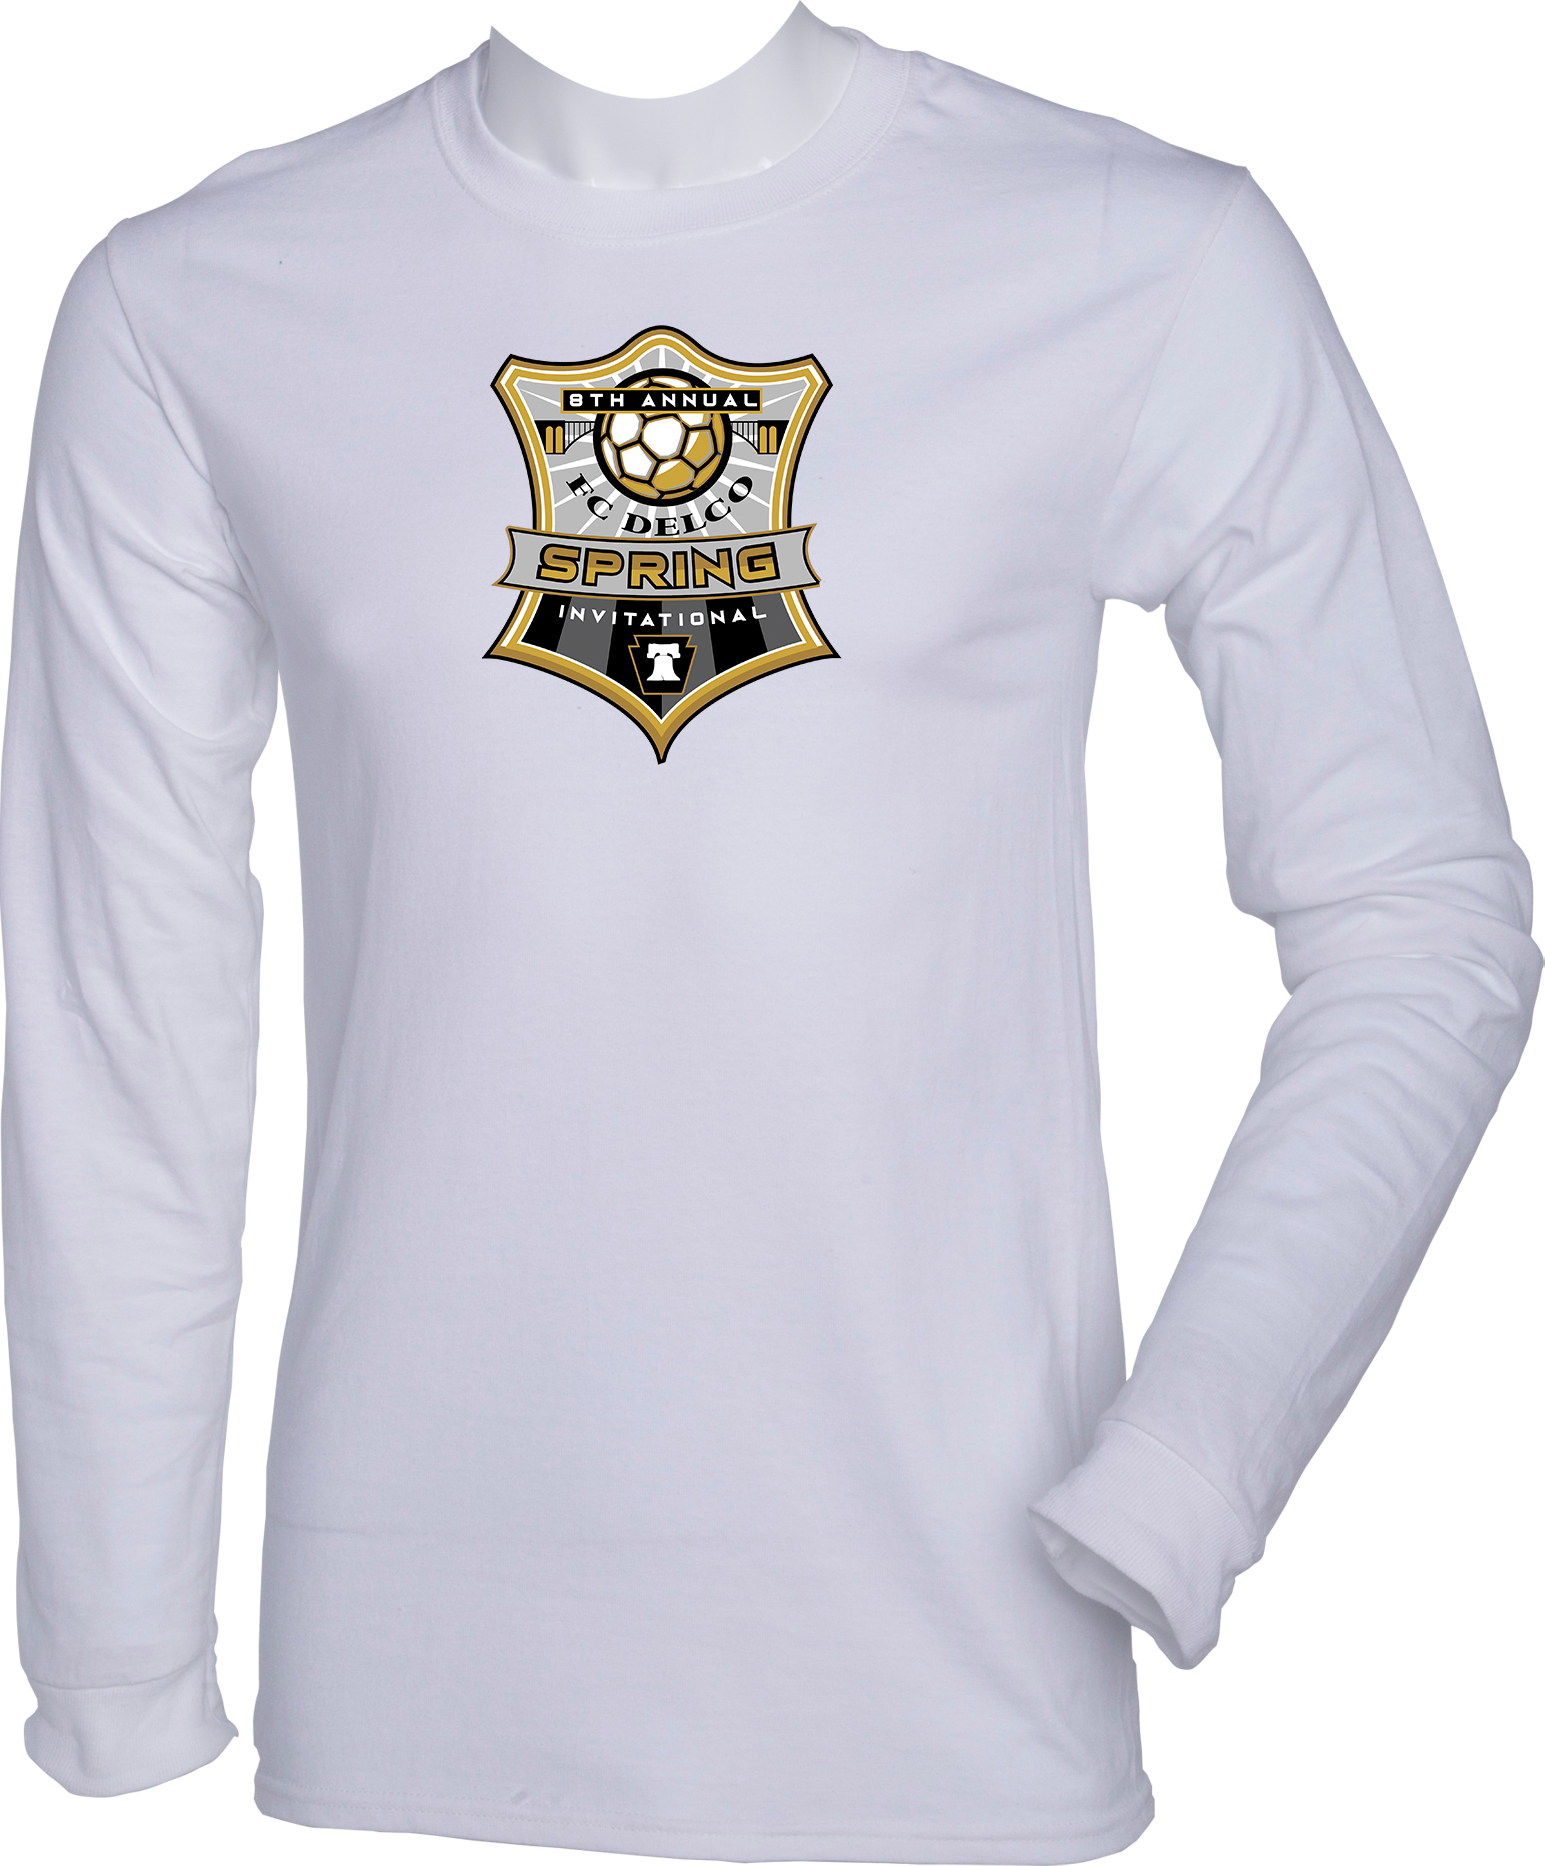 LONG SLEEVES - 2023 8th Annual FC DELCO Spring Invitational